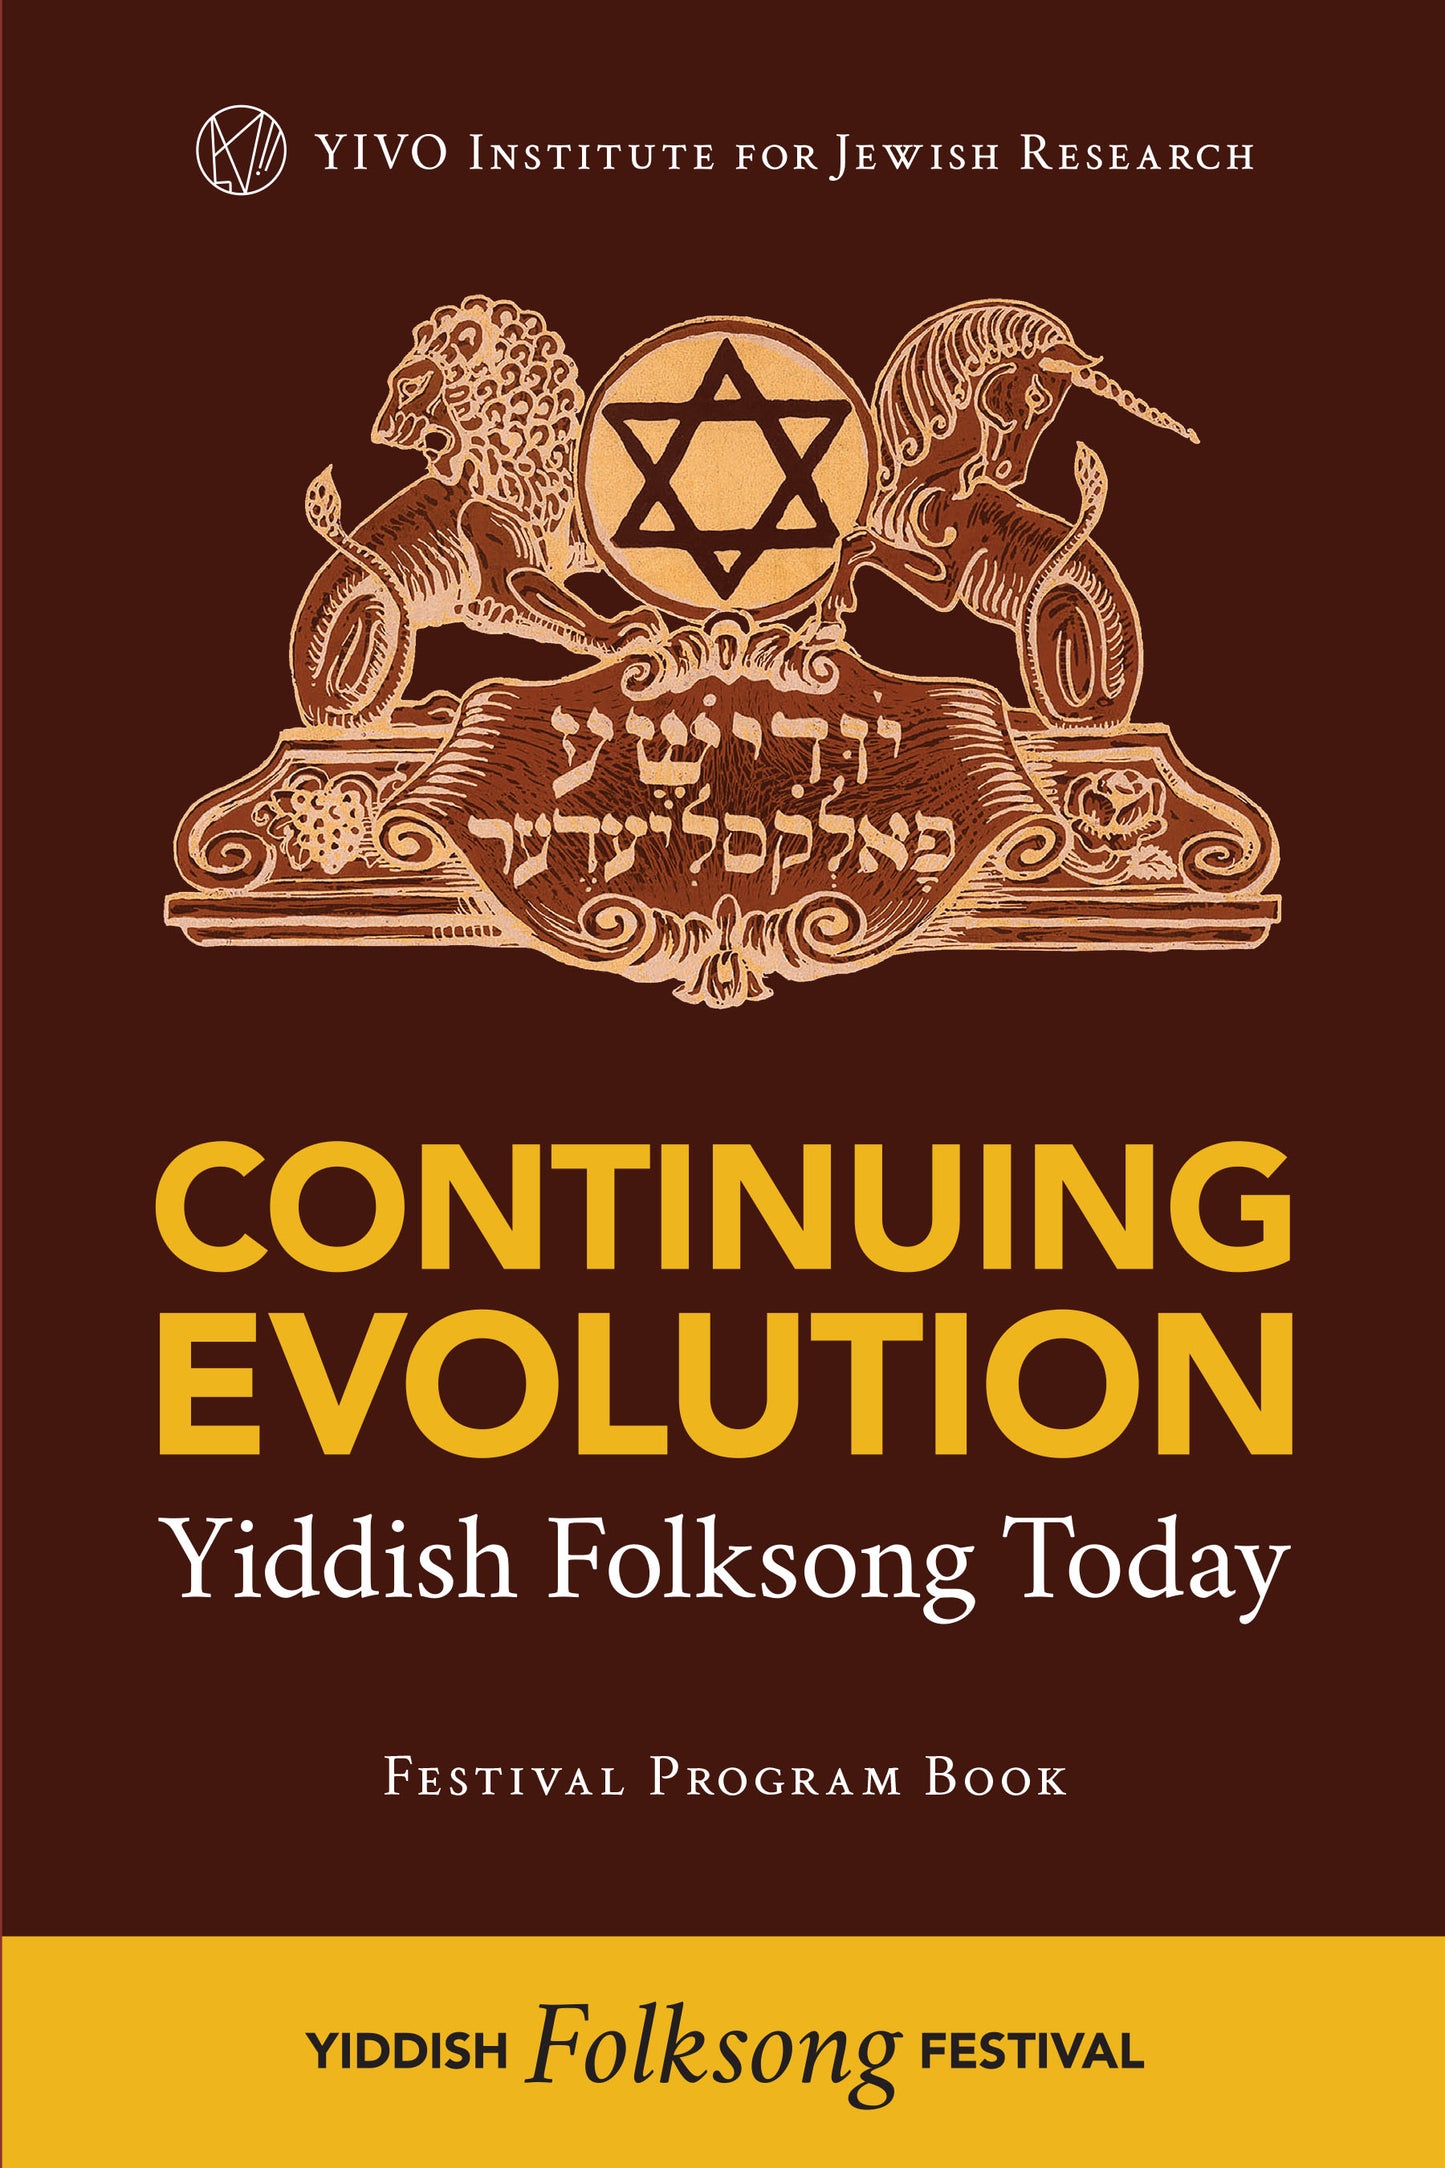 Continuing Evolution: Yiddish Folksong Today